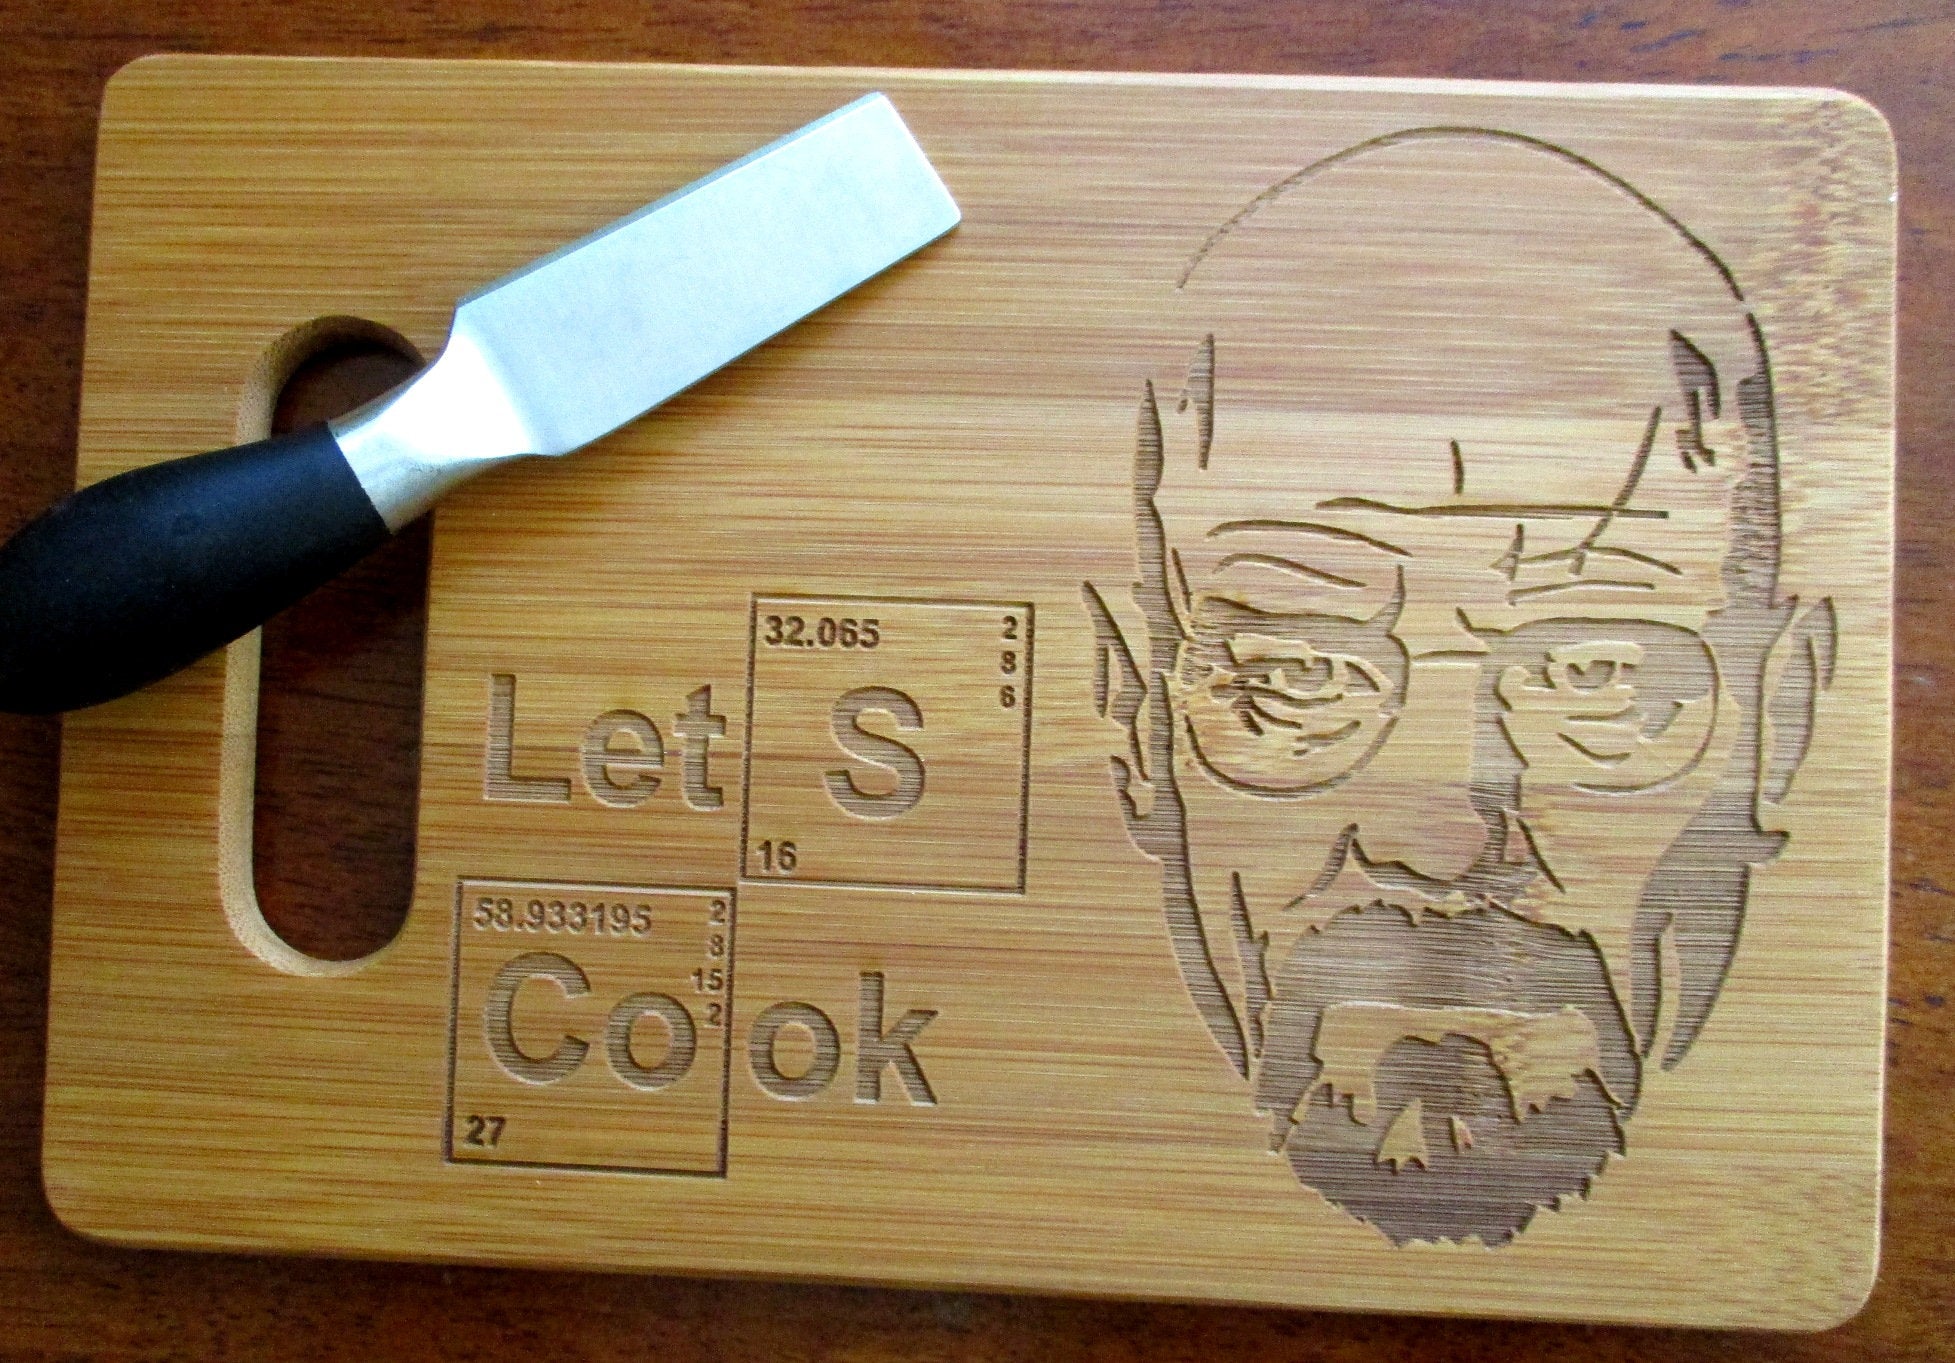 Personalized Dishwasher Safe Bamboo Carving Board 